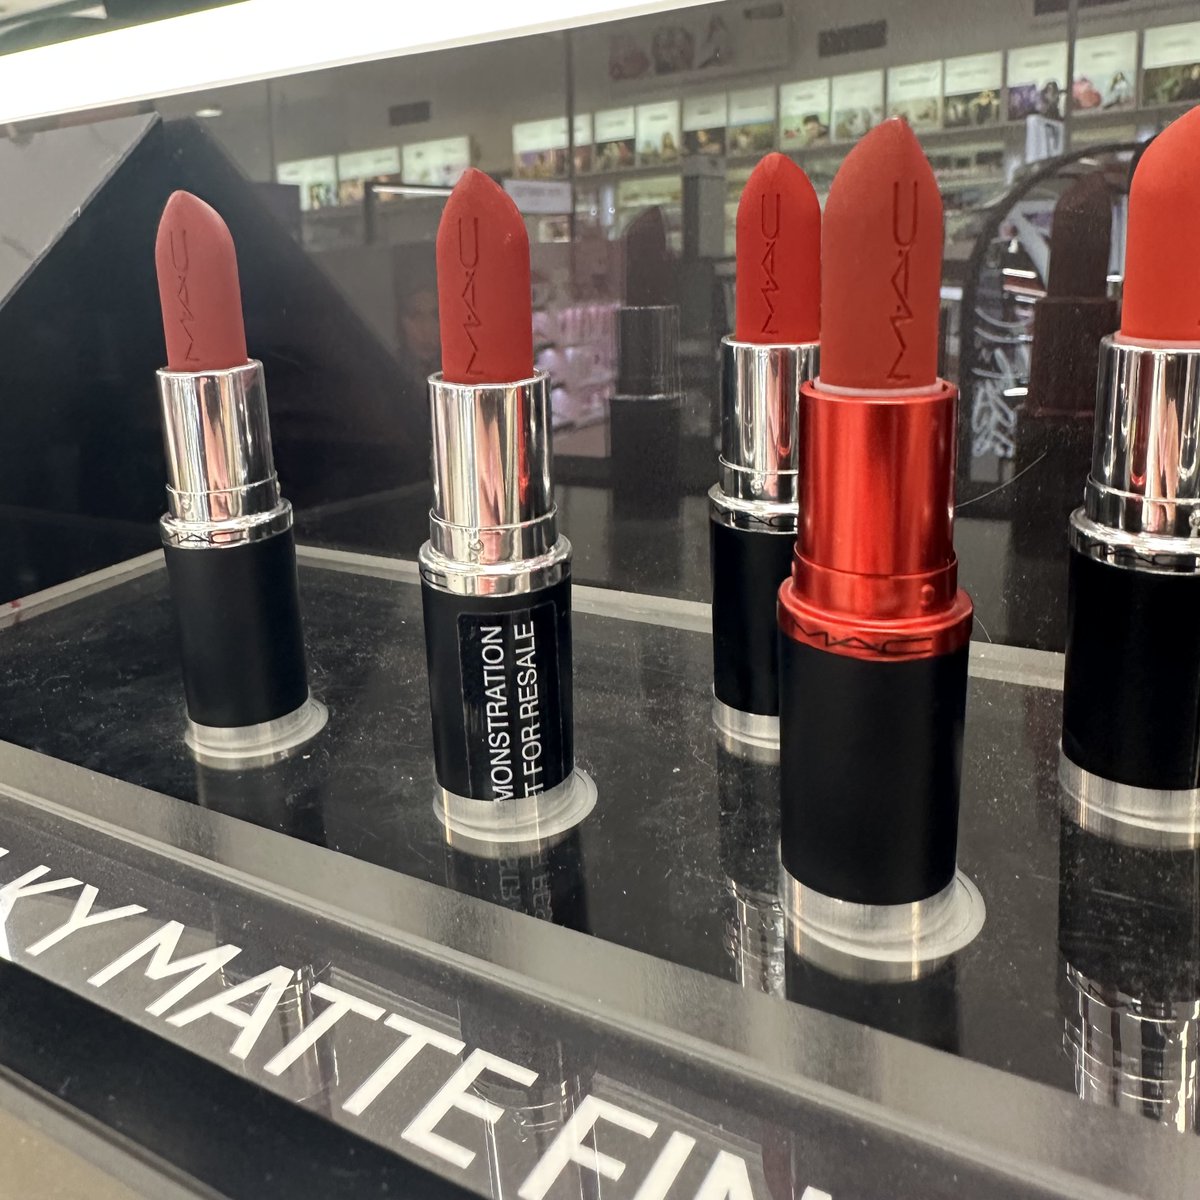 Mac Iconic Lipstick now maxed out to give lips more available @bootsuk 💄 #doncaster #frenchgate #mac #boots #lipstick